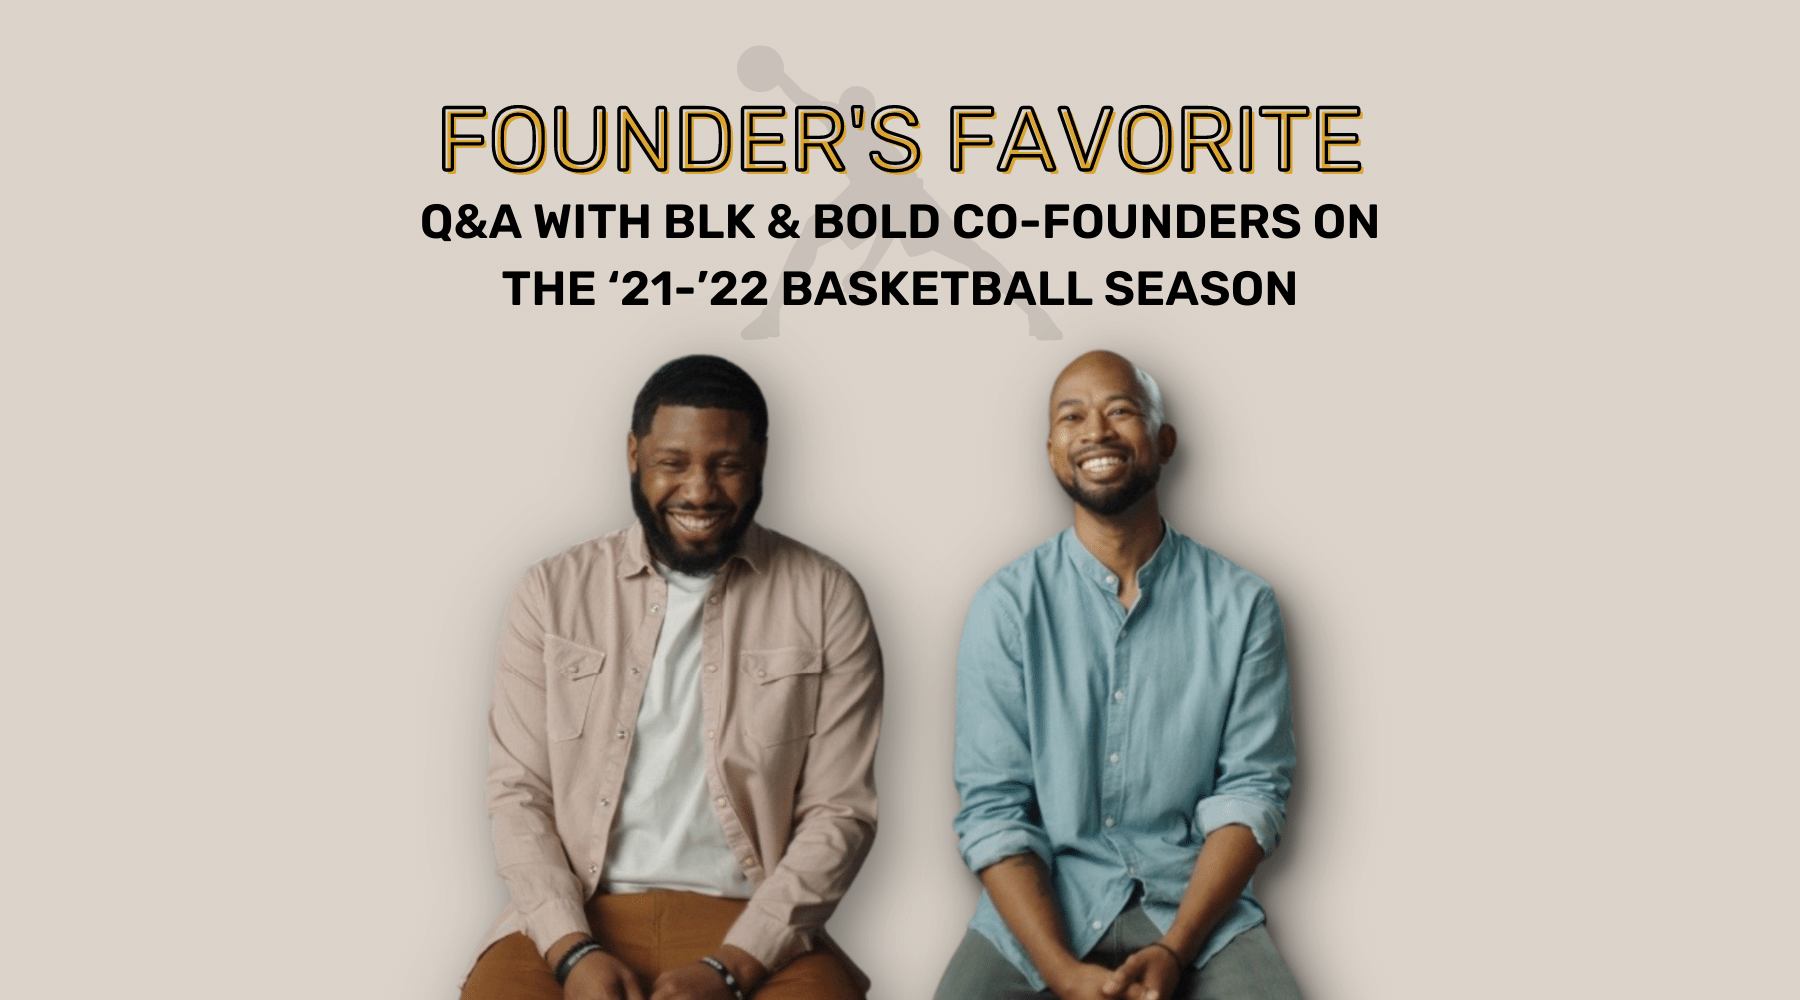 A graphic with Rod Johnson and Pernell Cezar seen laughing with text above that says "Founder’s Favorite: Q&A with BLK & Bold co-founders on the ‘21-’22 Basketball Season"